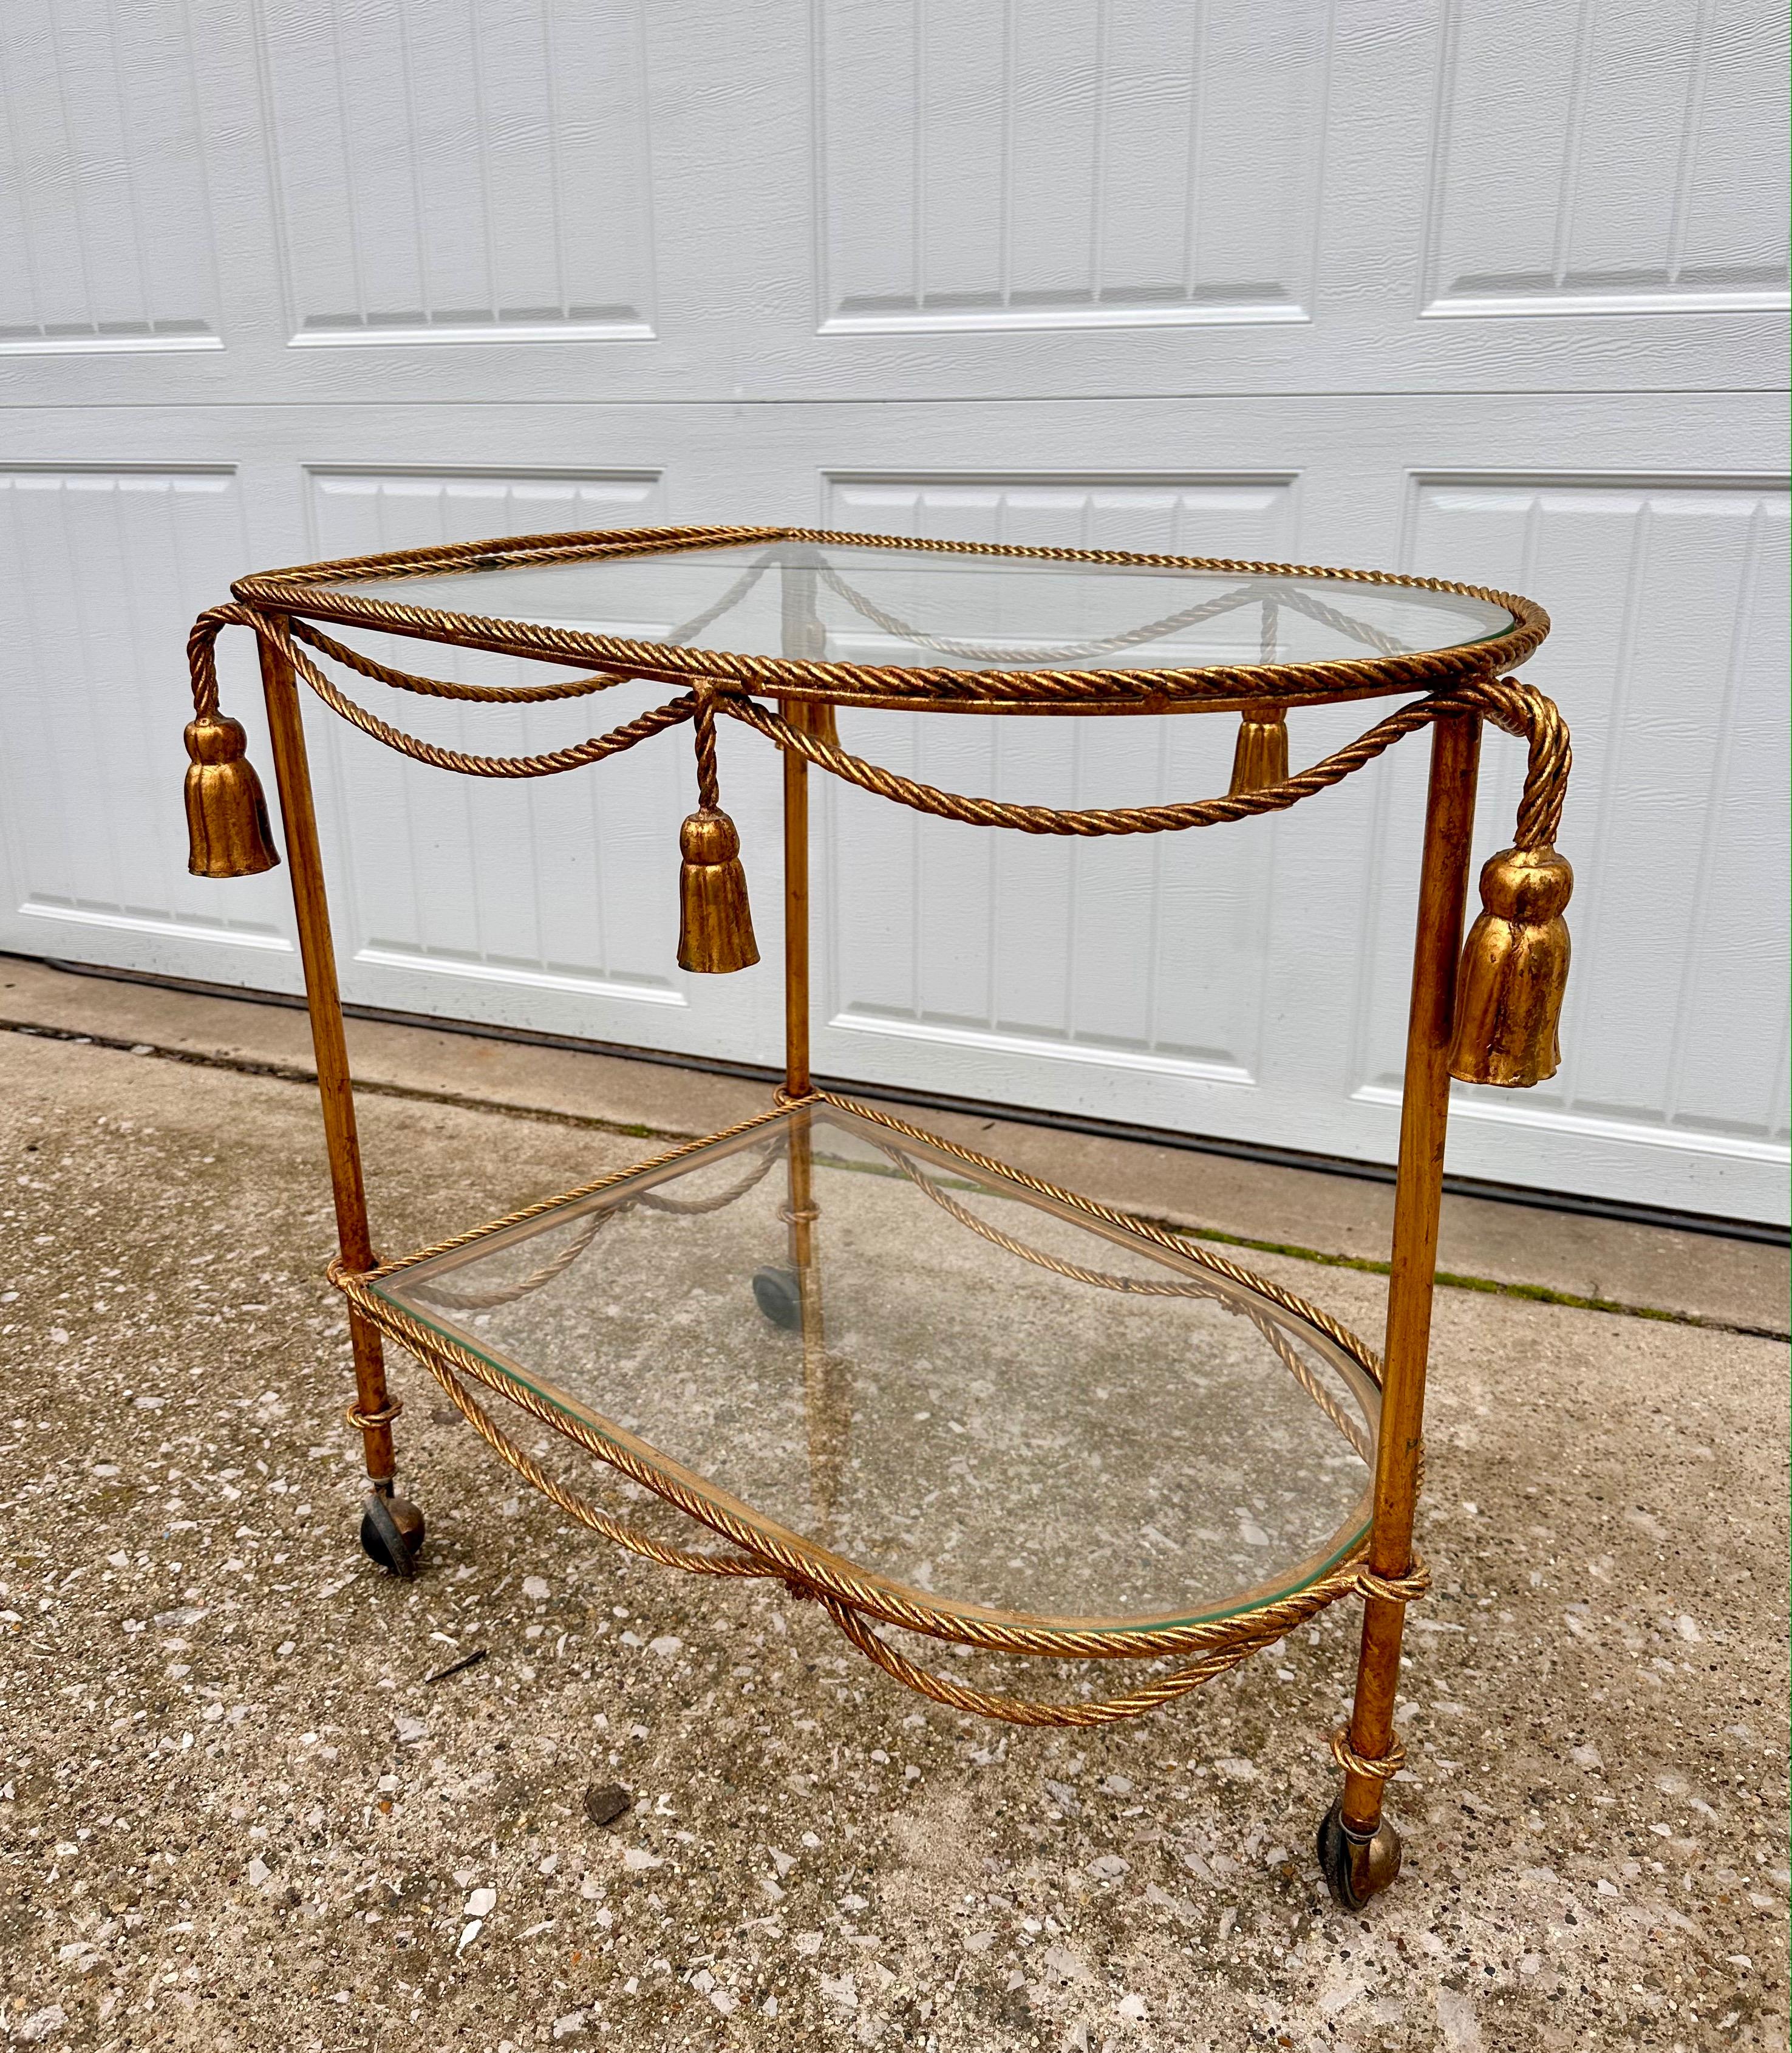 Vintage Hollywood Regency gilded two tiered tasseled bar cart on wheels. In great condition no chips or cracks in the glass, wheels roll smoothly and minimal patina on cart. Some patina and chipping due to age. Some very light scratches on the